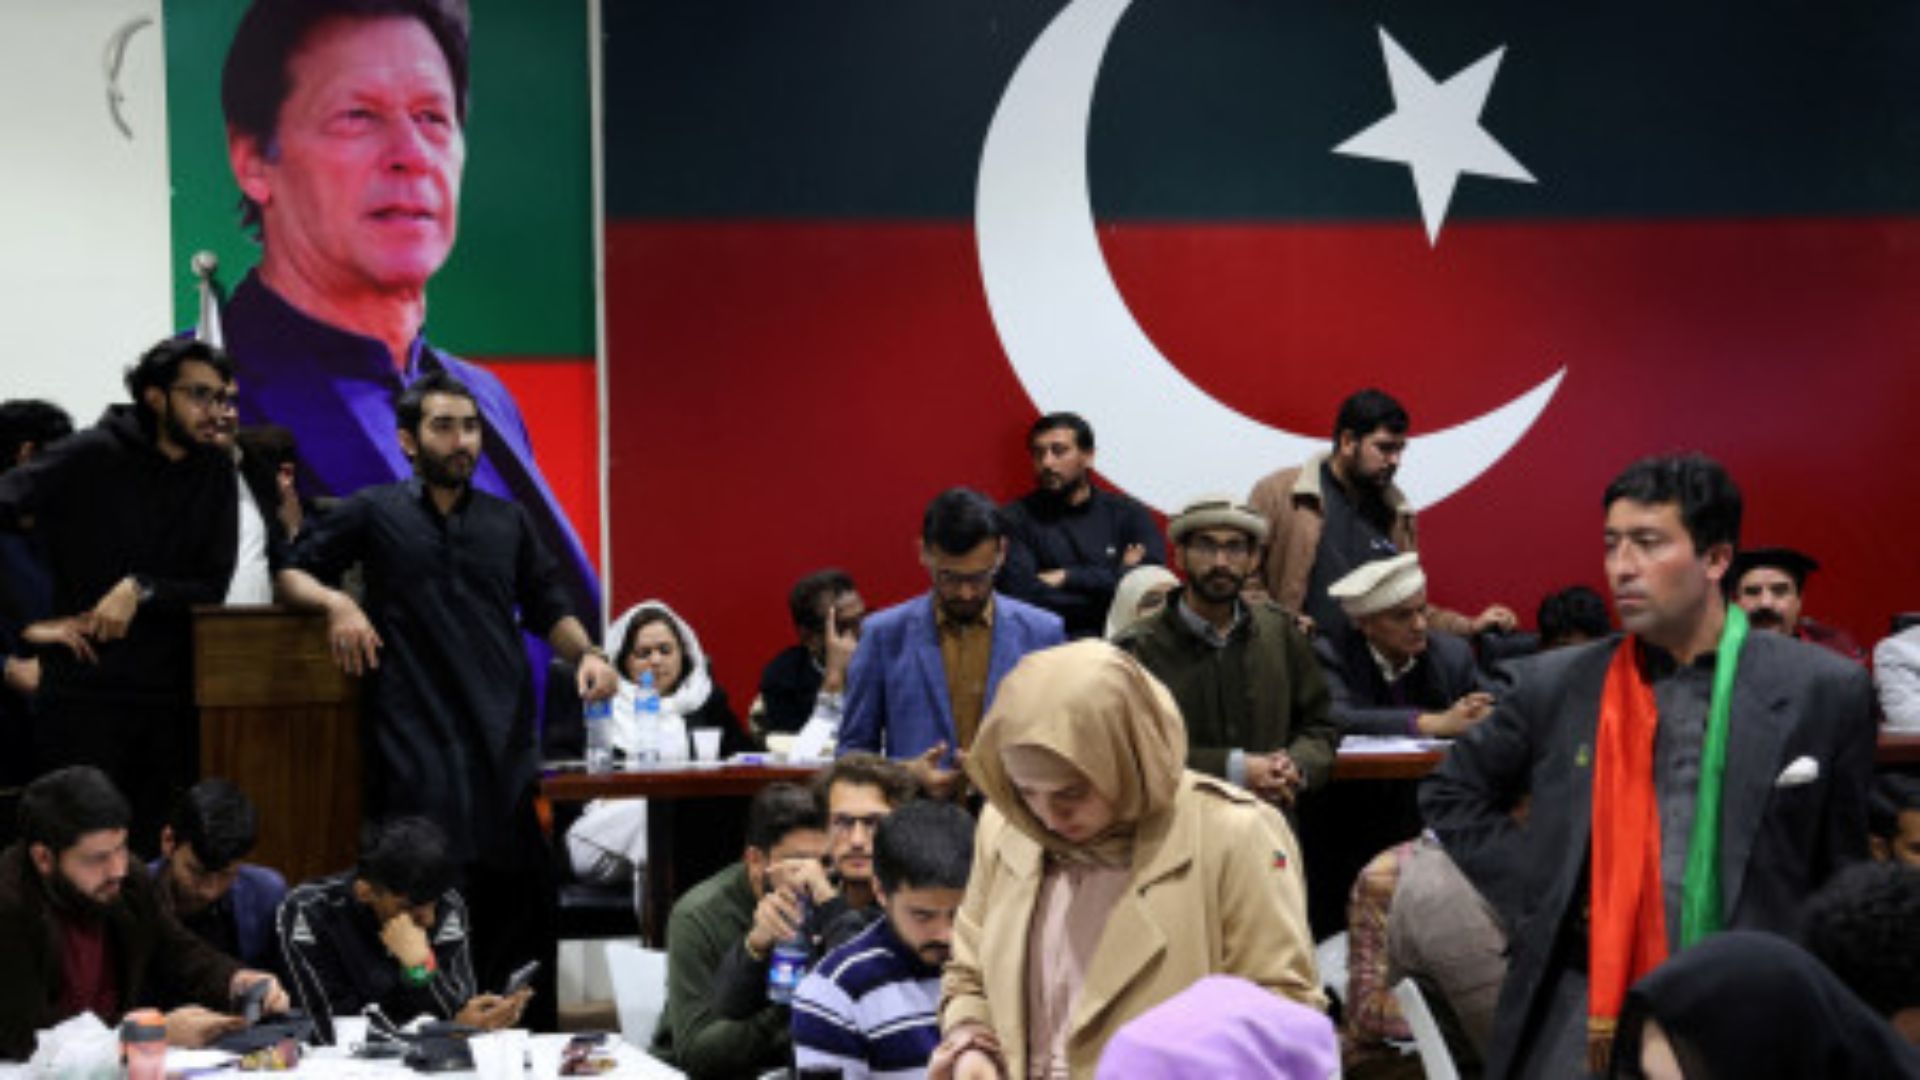 Pakistan election: Imran Khan’s Party Seeks Government Formation, threatens protests